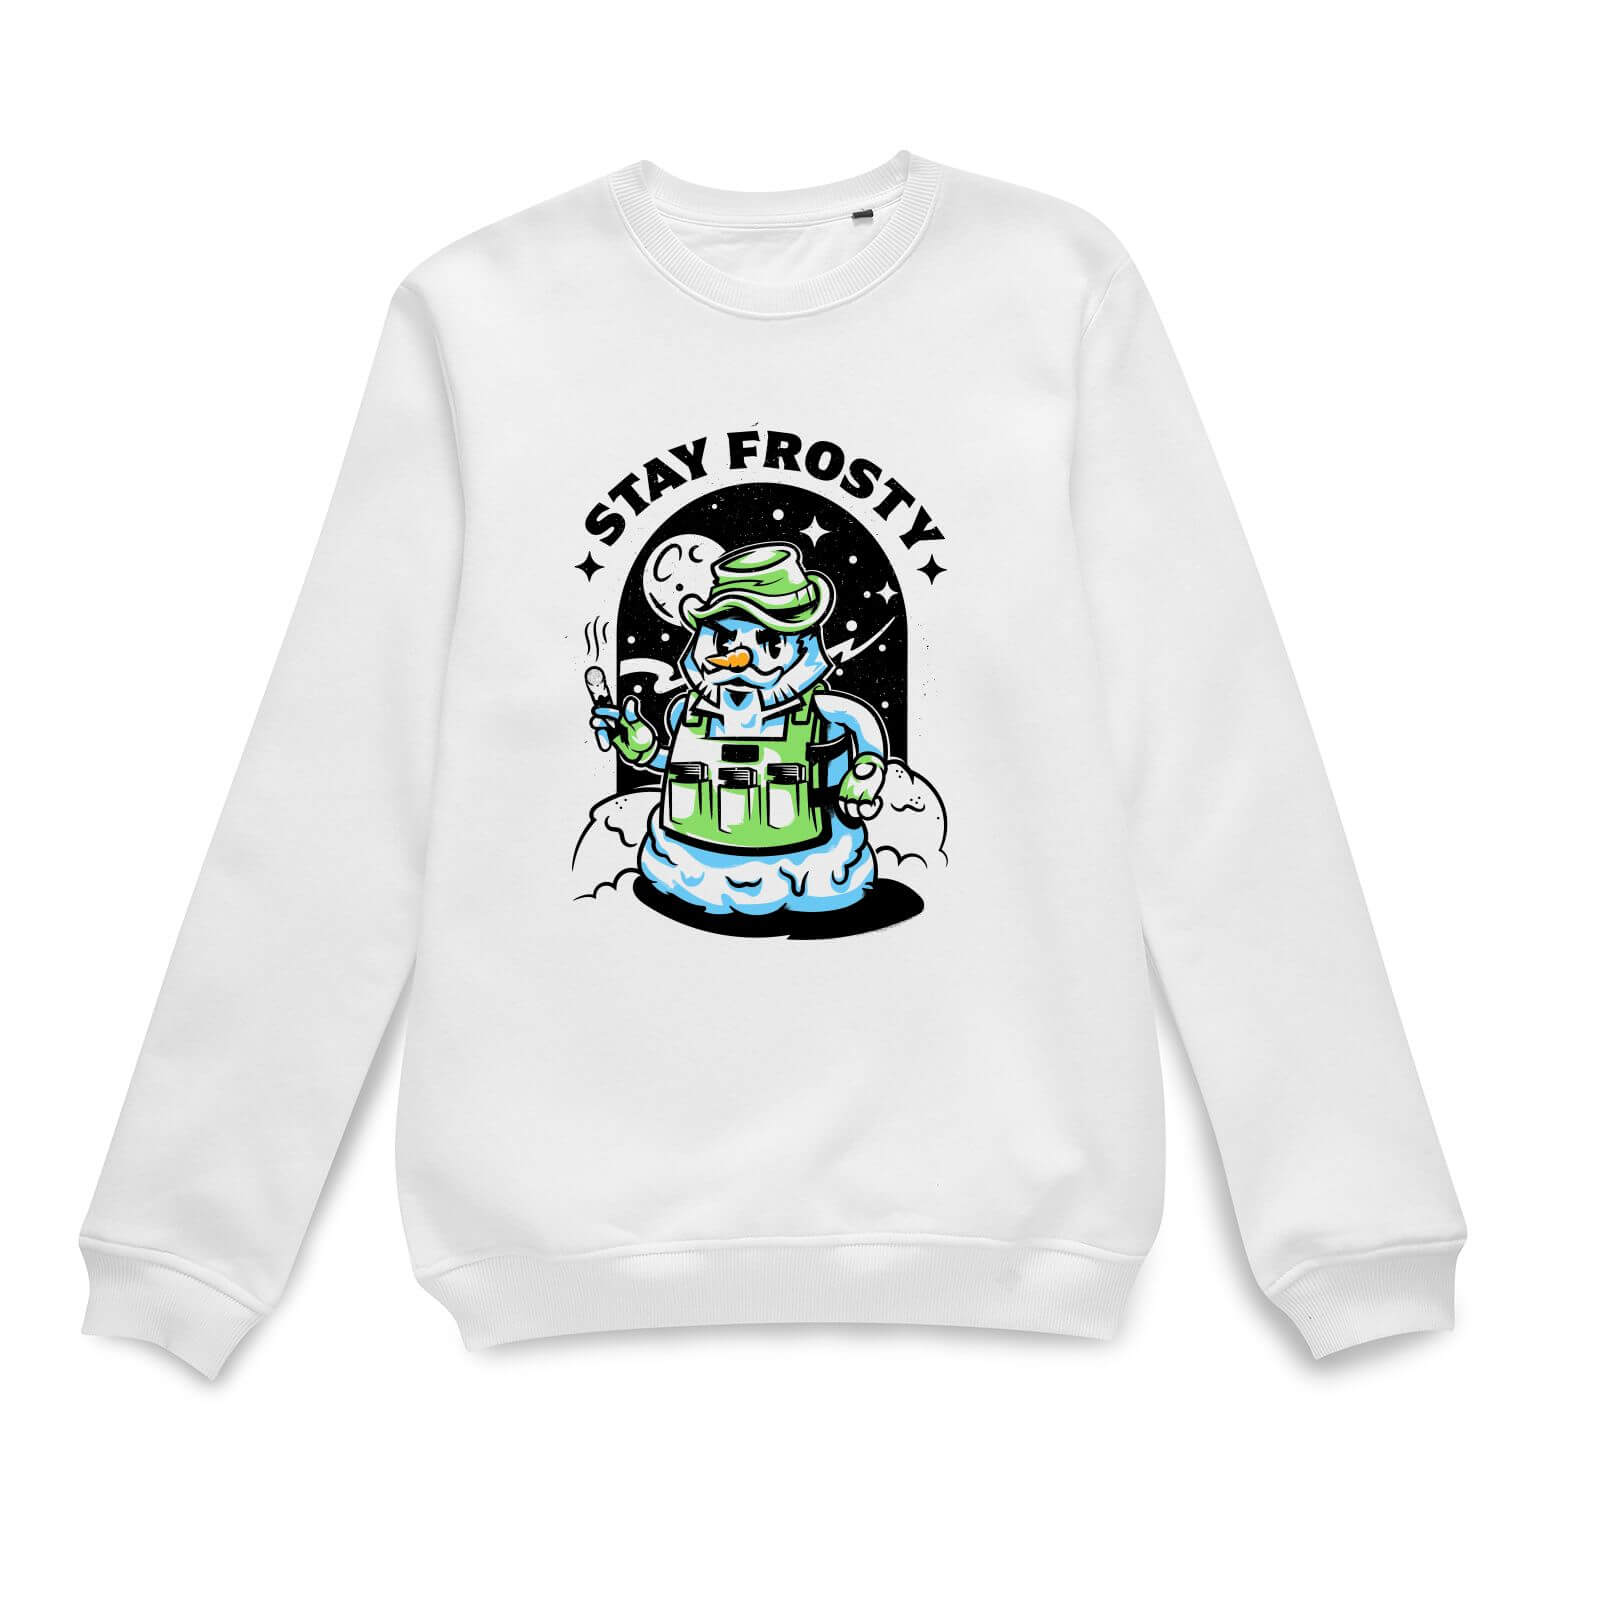 Call Of Duty Stay Frosty Christmas Jumper - White - XXL - White product